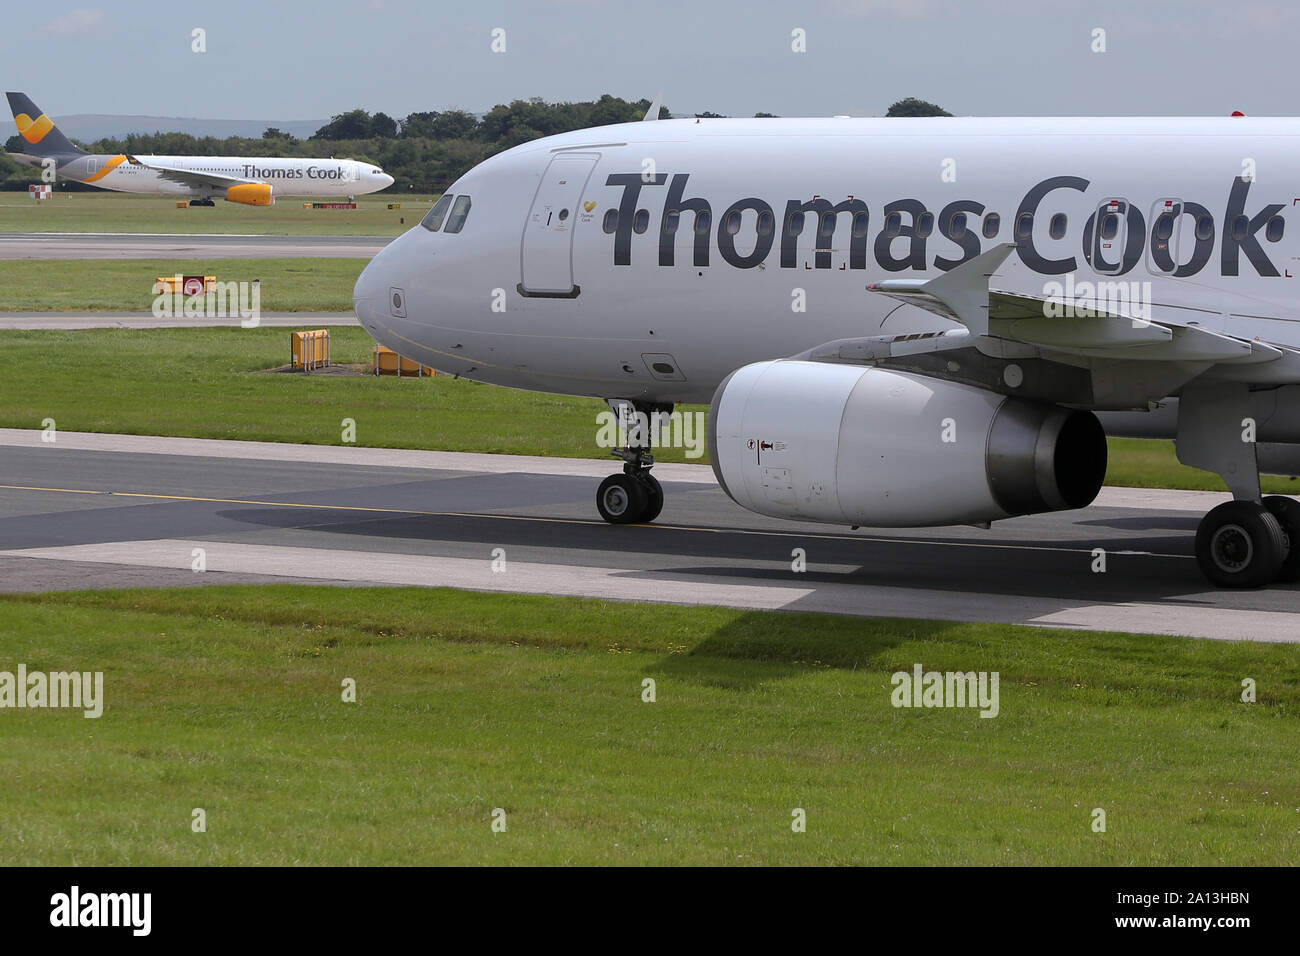 (File images) Thomas Cook civil jet airliners captured at Manchester International Airport, Great Britain. As reported on Monday, 23 Sep 2019, Thomas Cook Group Plc, the 178-year travel company that became one of the U.K.’s best-known brands, has collapsed under a pile of debt, leaving tens of thousands of British tourists stranded across Europe. Stock Photo